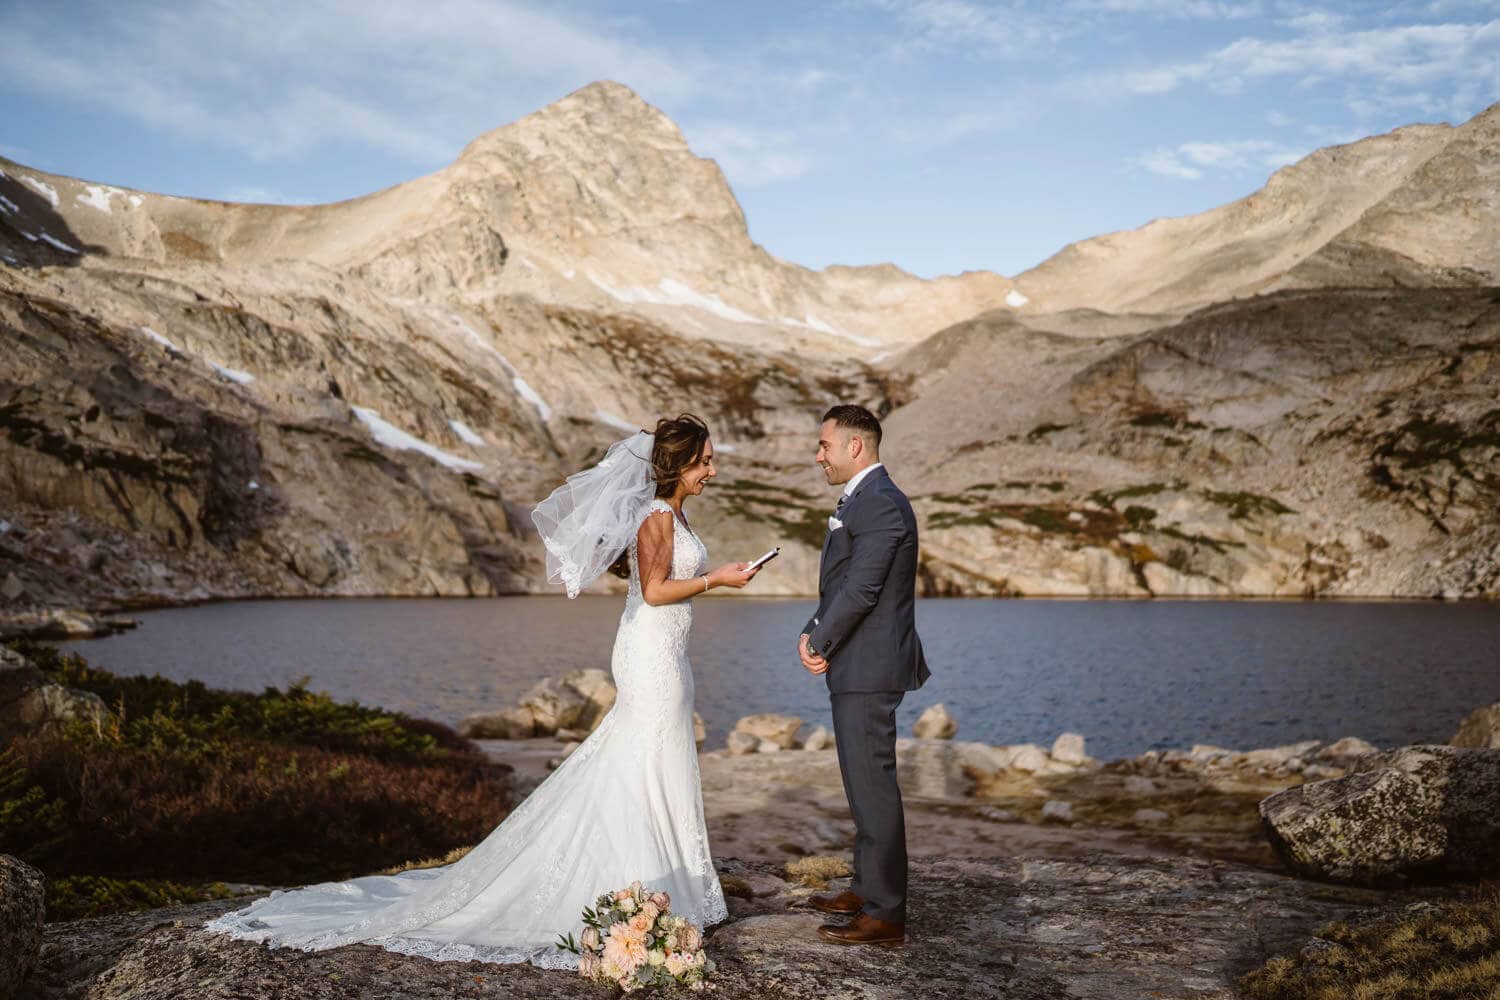 A bride and groom sharing their vows at sunrise in the mountains.